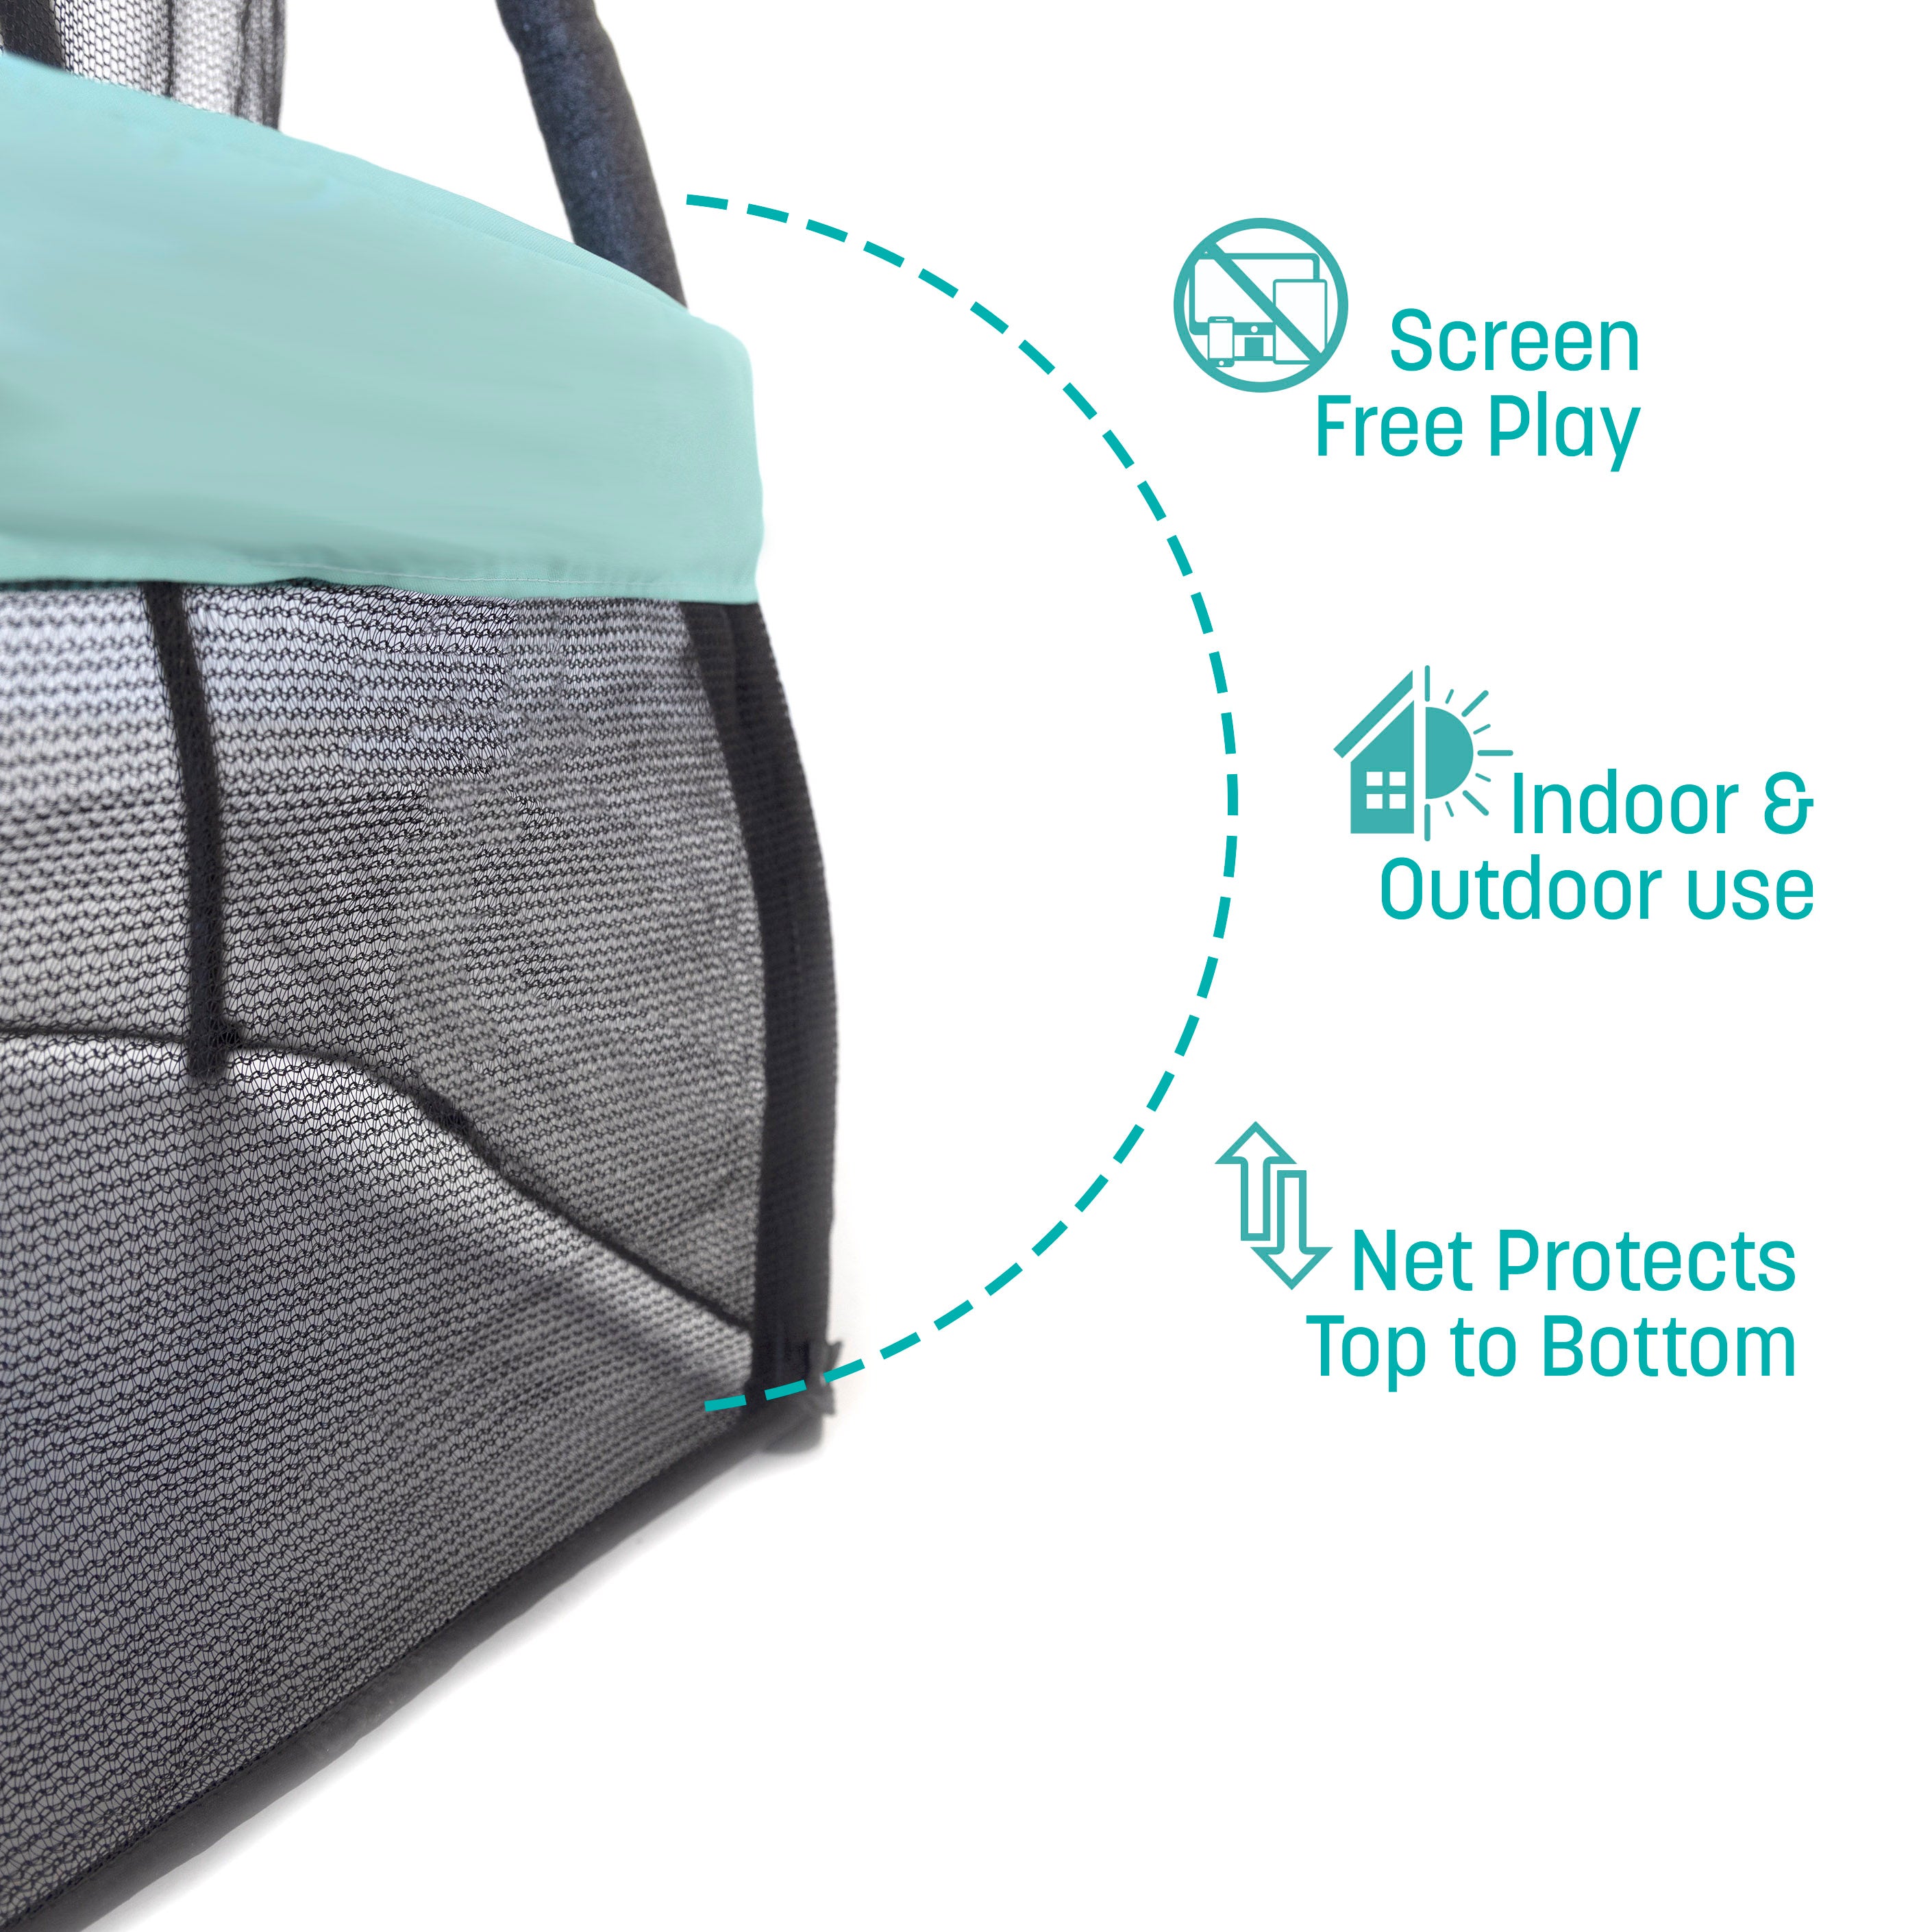 The lower enclosure net hangs below the light blue spring pad. Three callout features state, “Screen Free Play, Indoor & Outdoor Use, Net Protects Top to Bottom”.